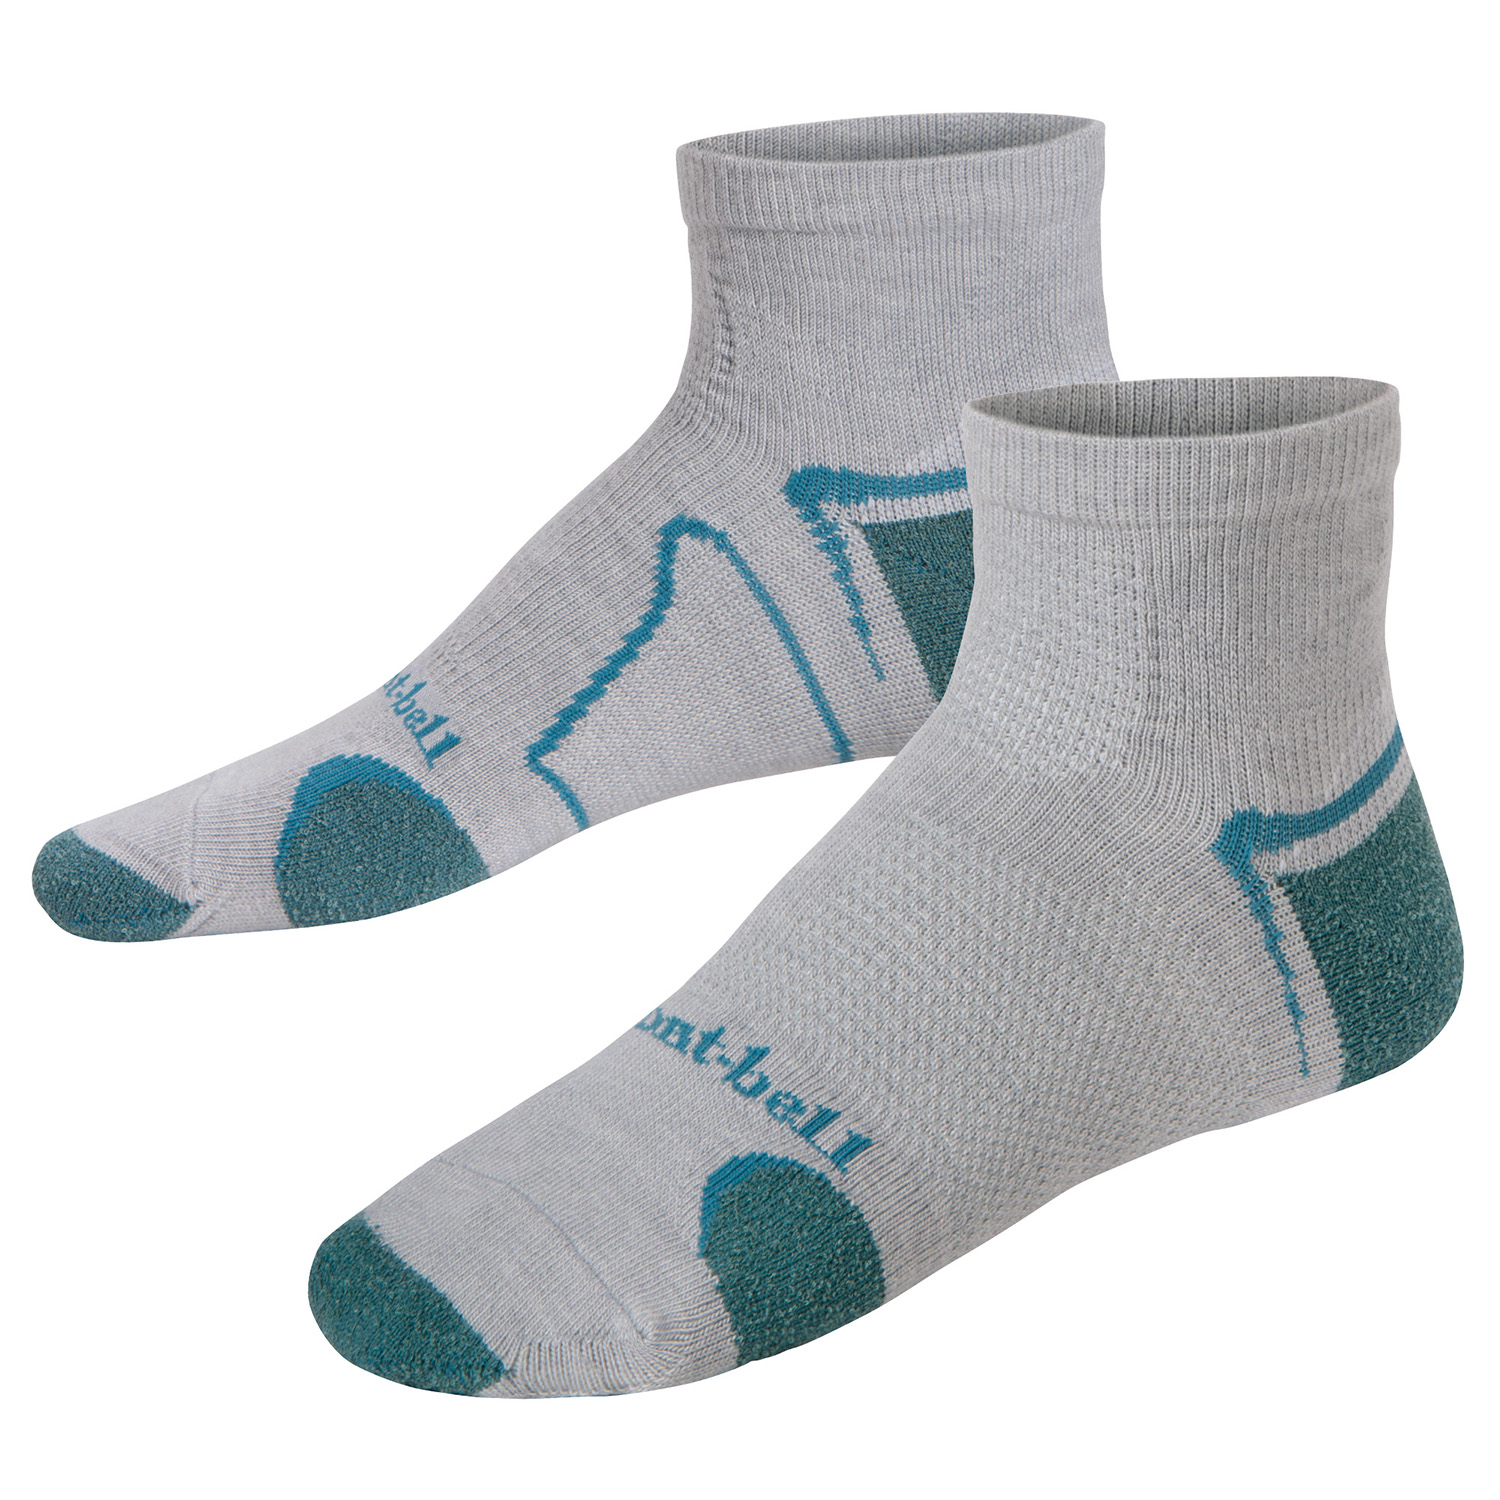 MontBell носки Wickron Supportec Travel Short Socks